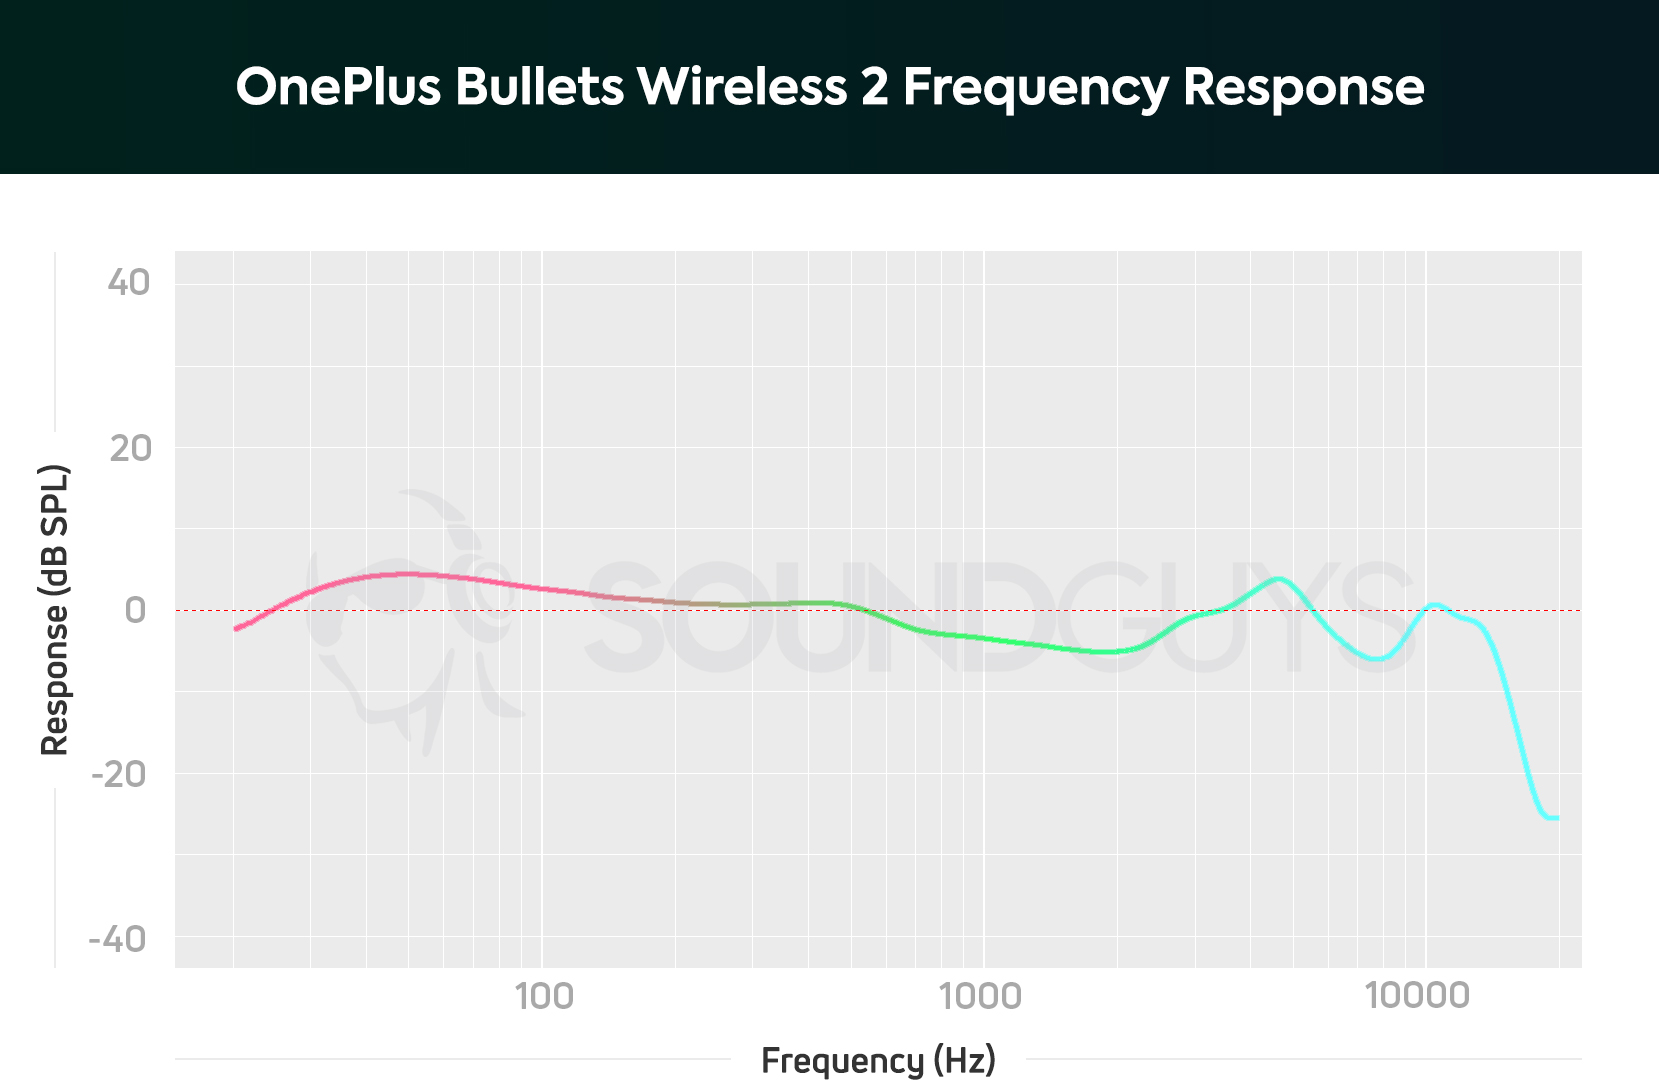 The OnePlus Bullets Wireless 2 AA frequency response chart.